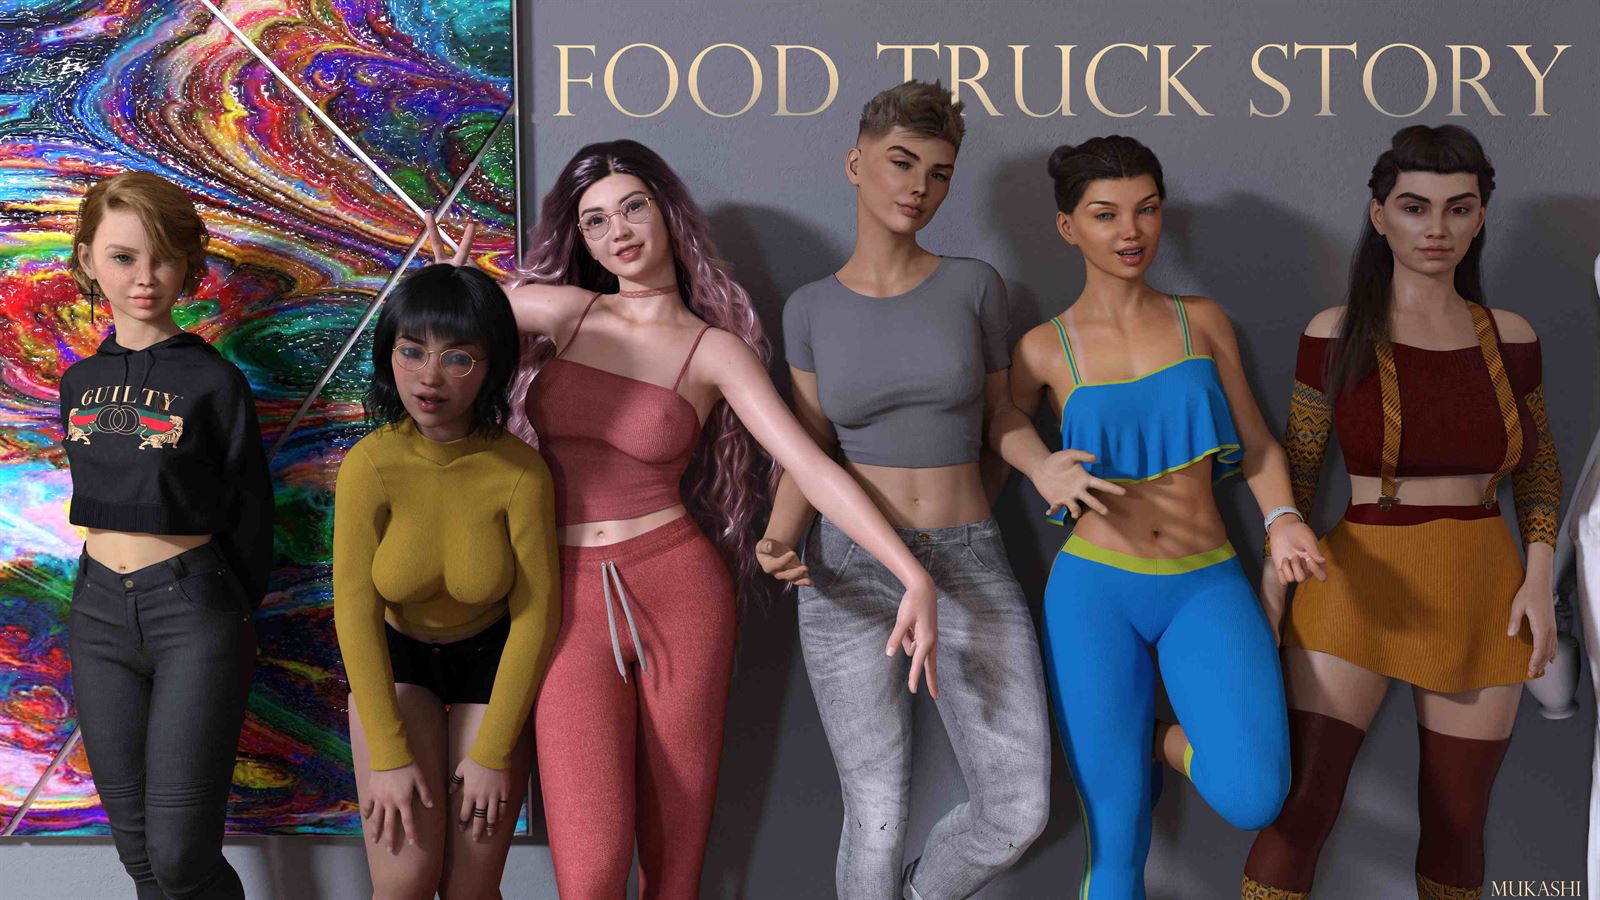 Food truck story porn game